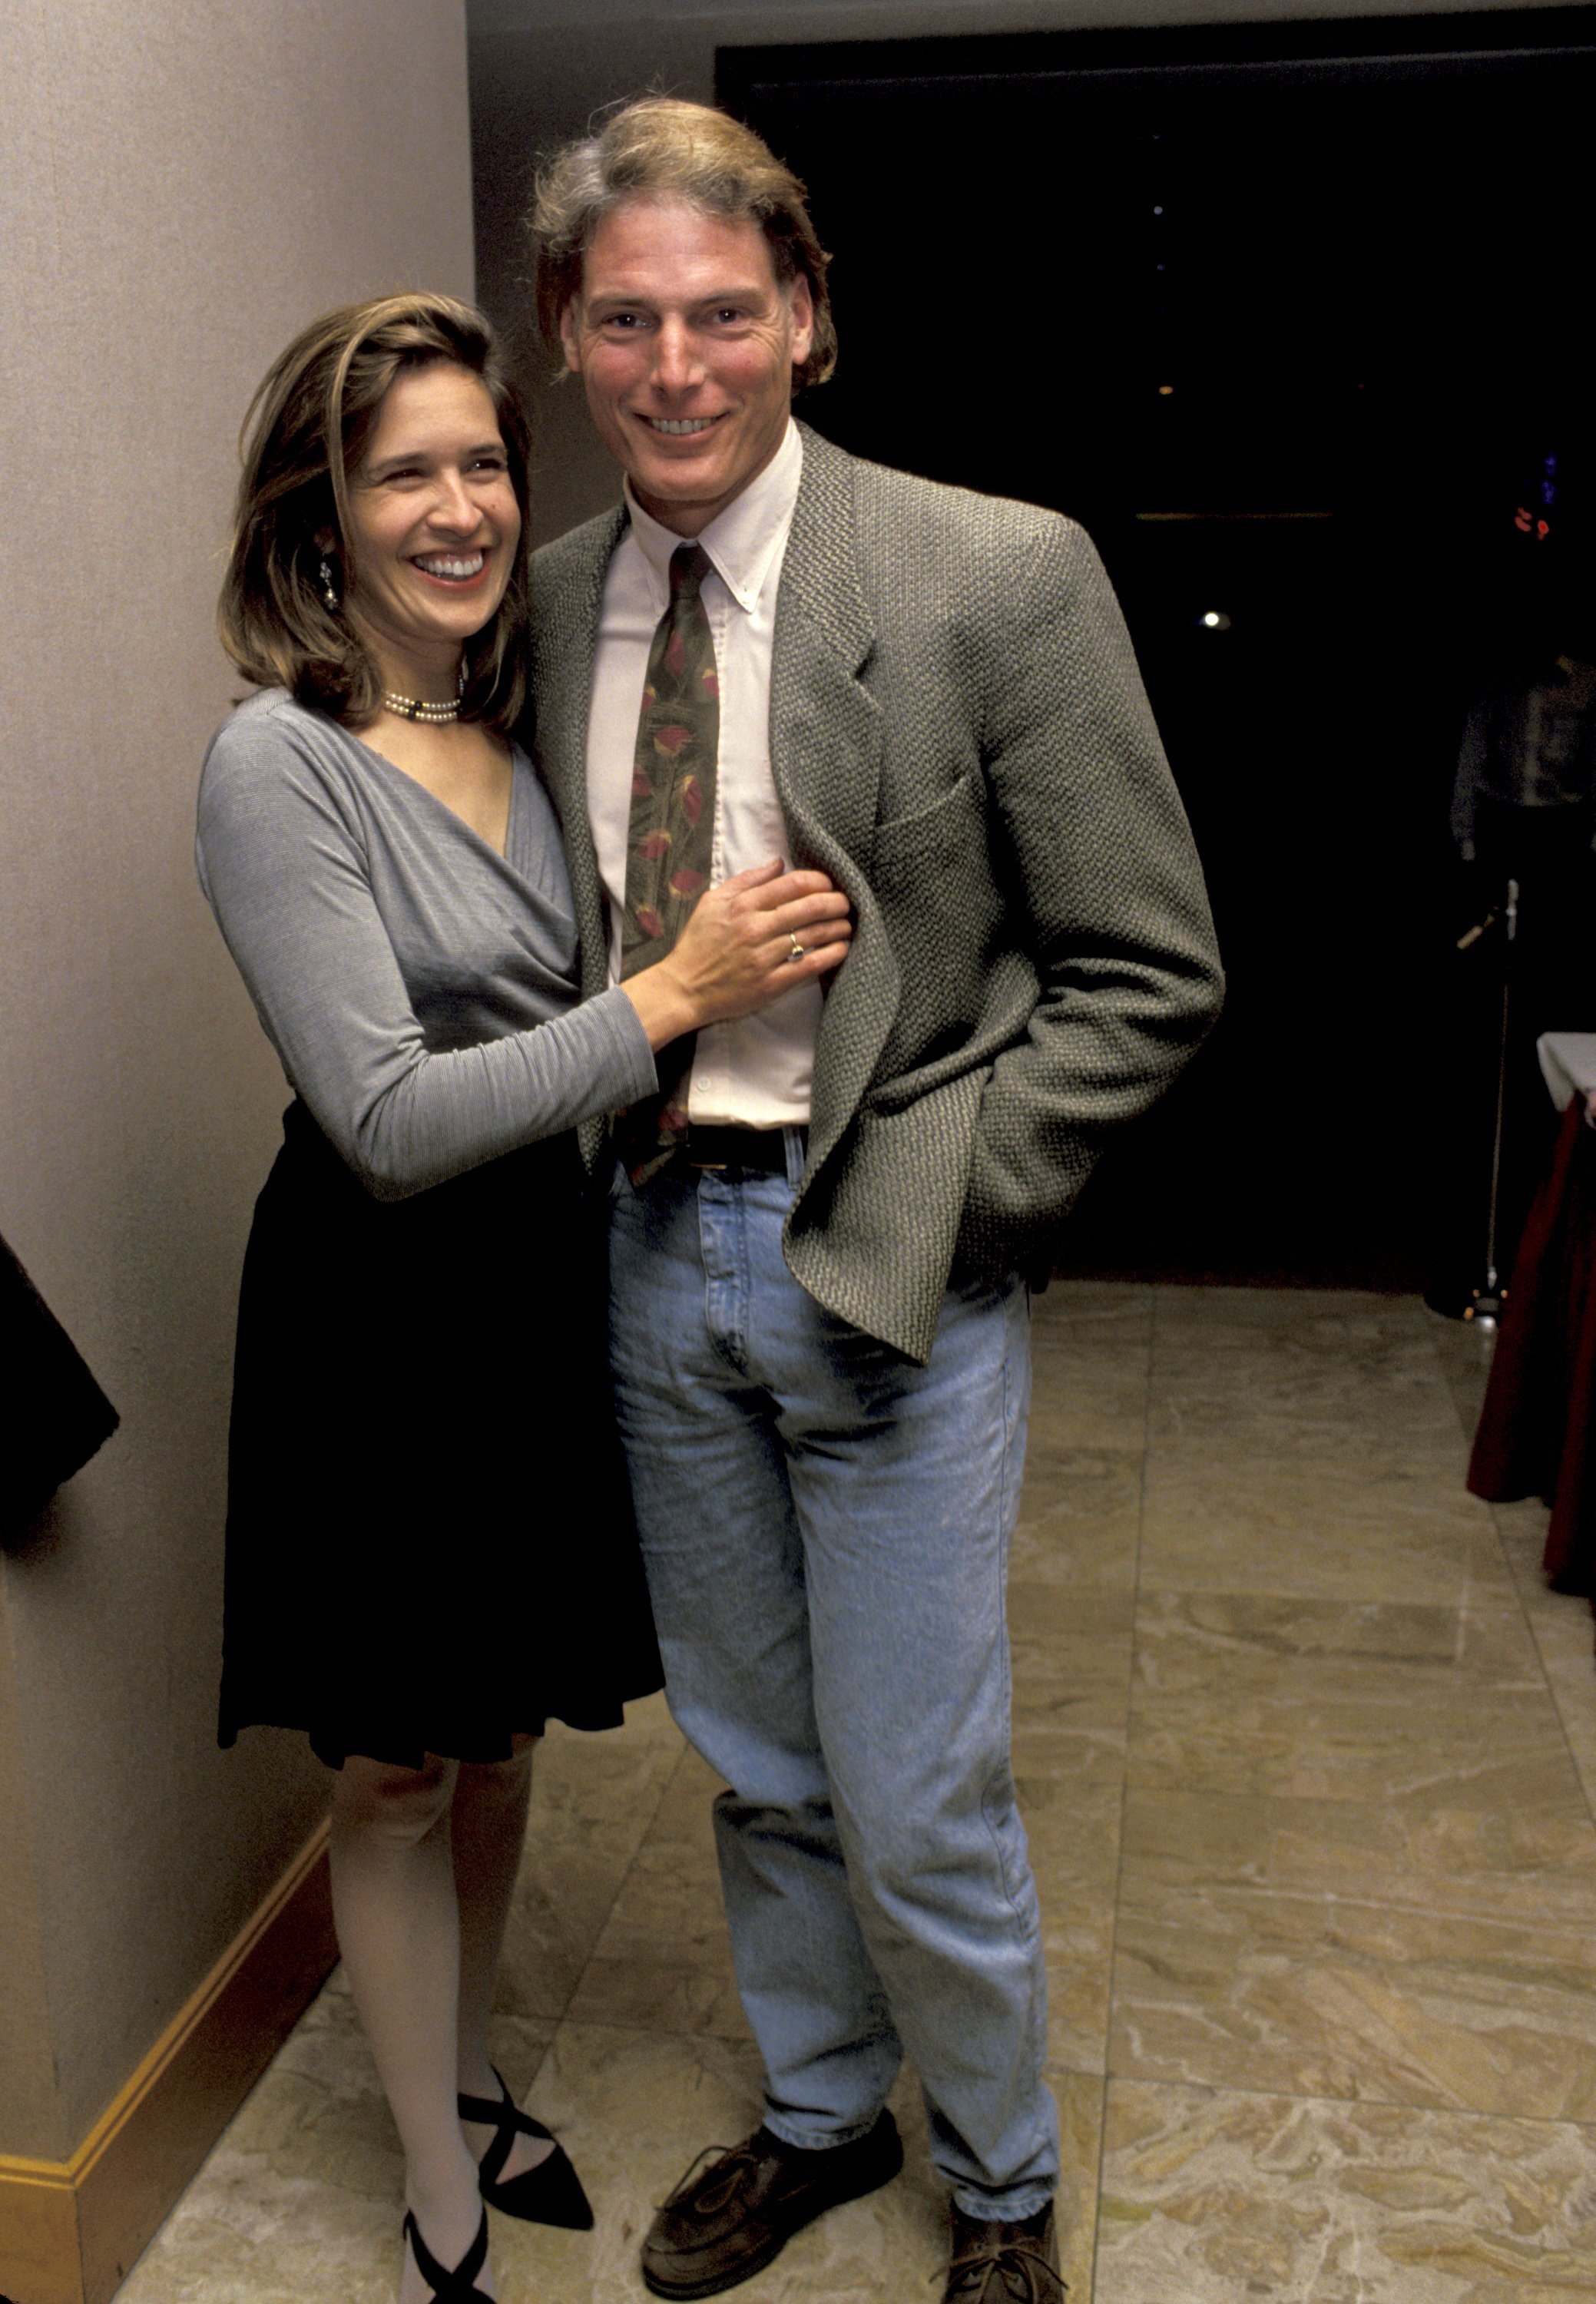 Dana Reeve and Christopher Reeve during "The Saint of Fort Washington" Opening To Benefit Creative Coalition at Worldwide Plaza Cinema in New York City, New York, United States. | Source: Getty Images